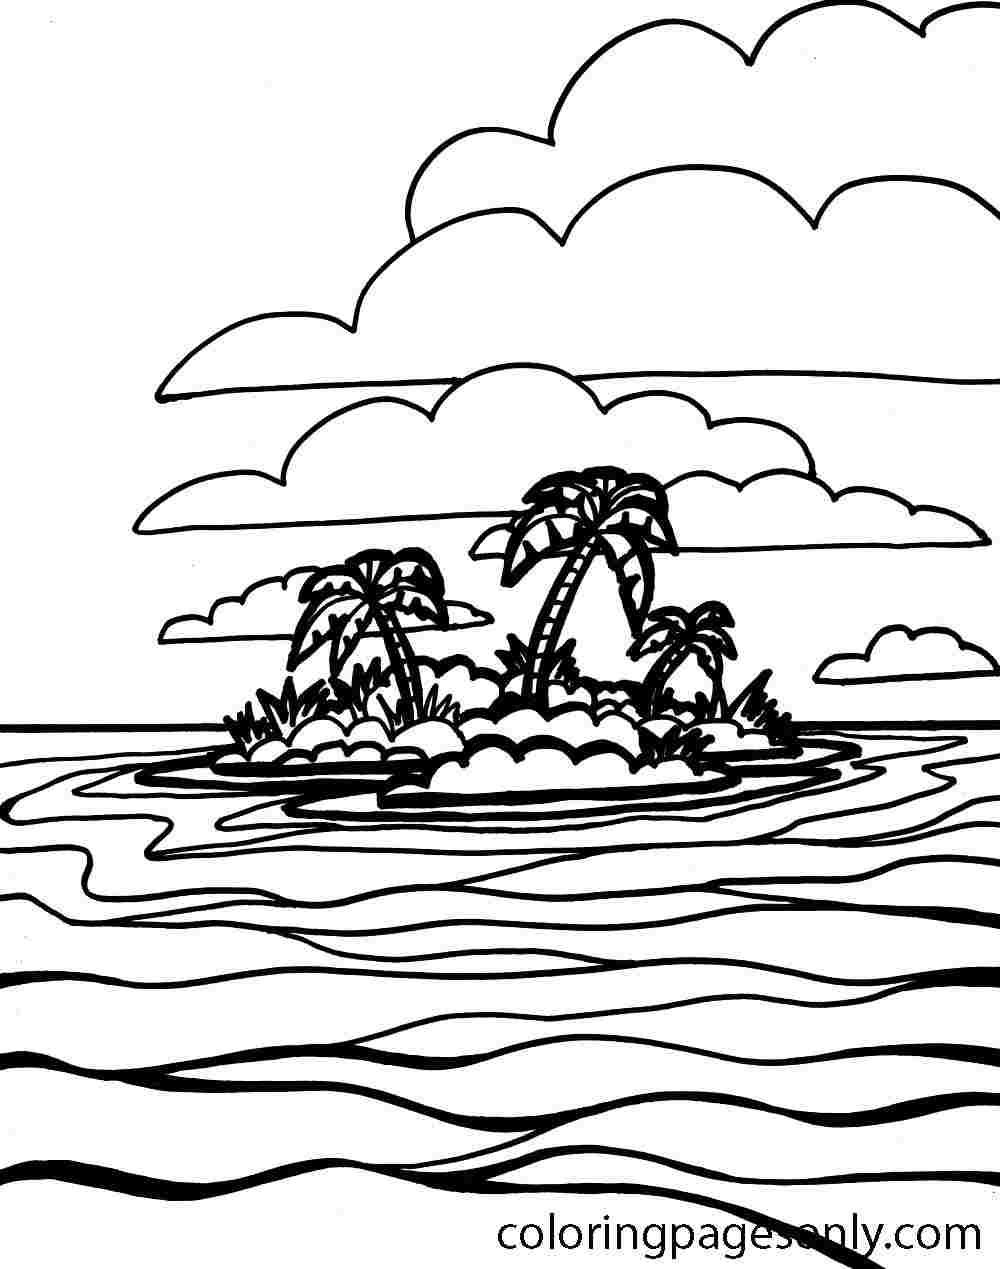 Oasis on the ocean floor Coloring Page